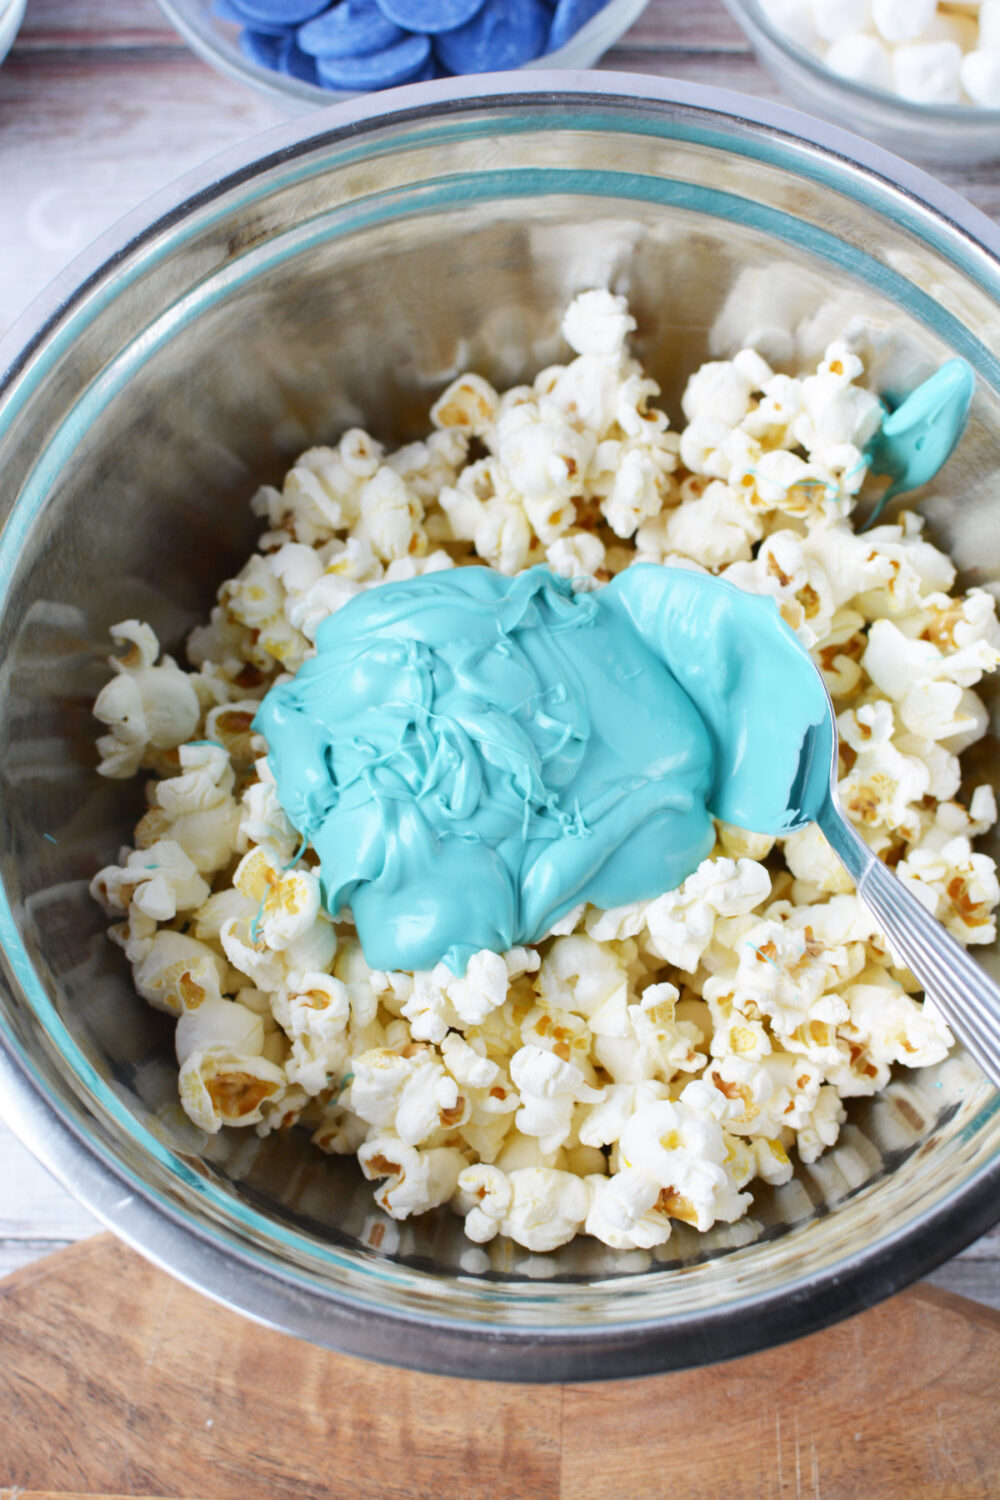 Blue melted candy in a bowl with plain popcorn.